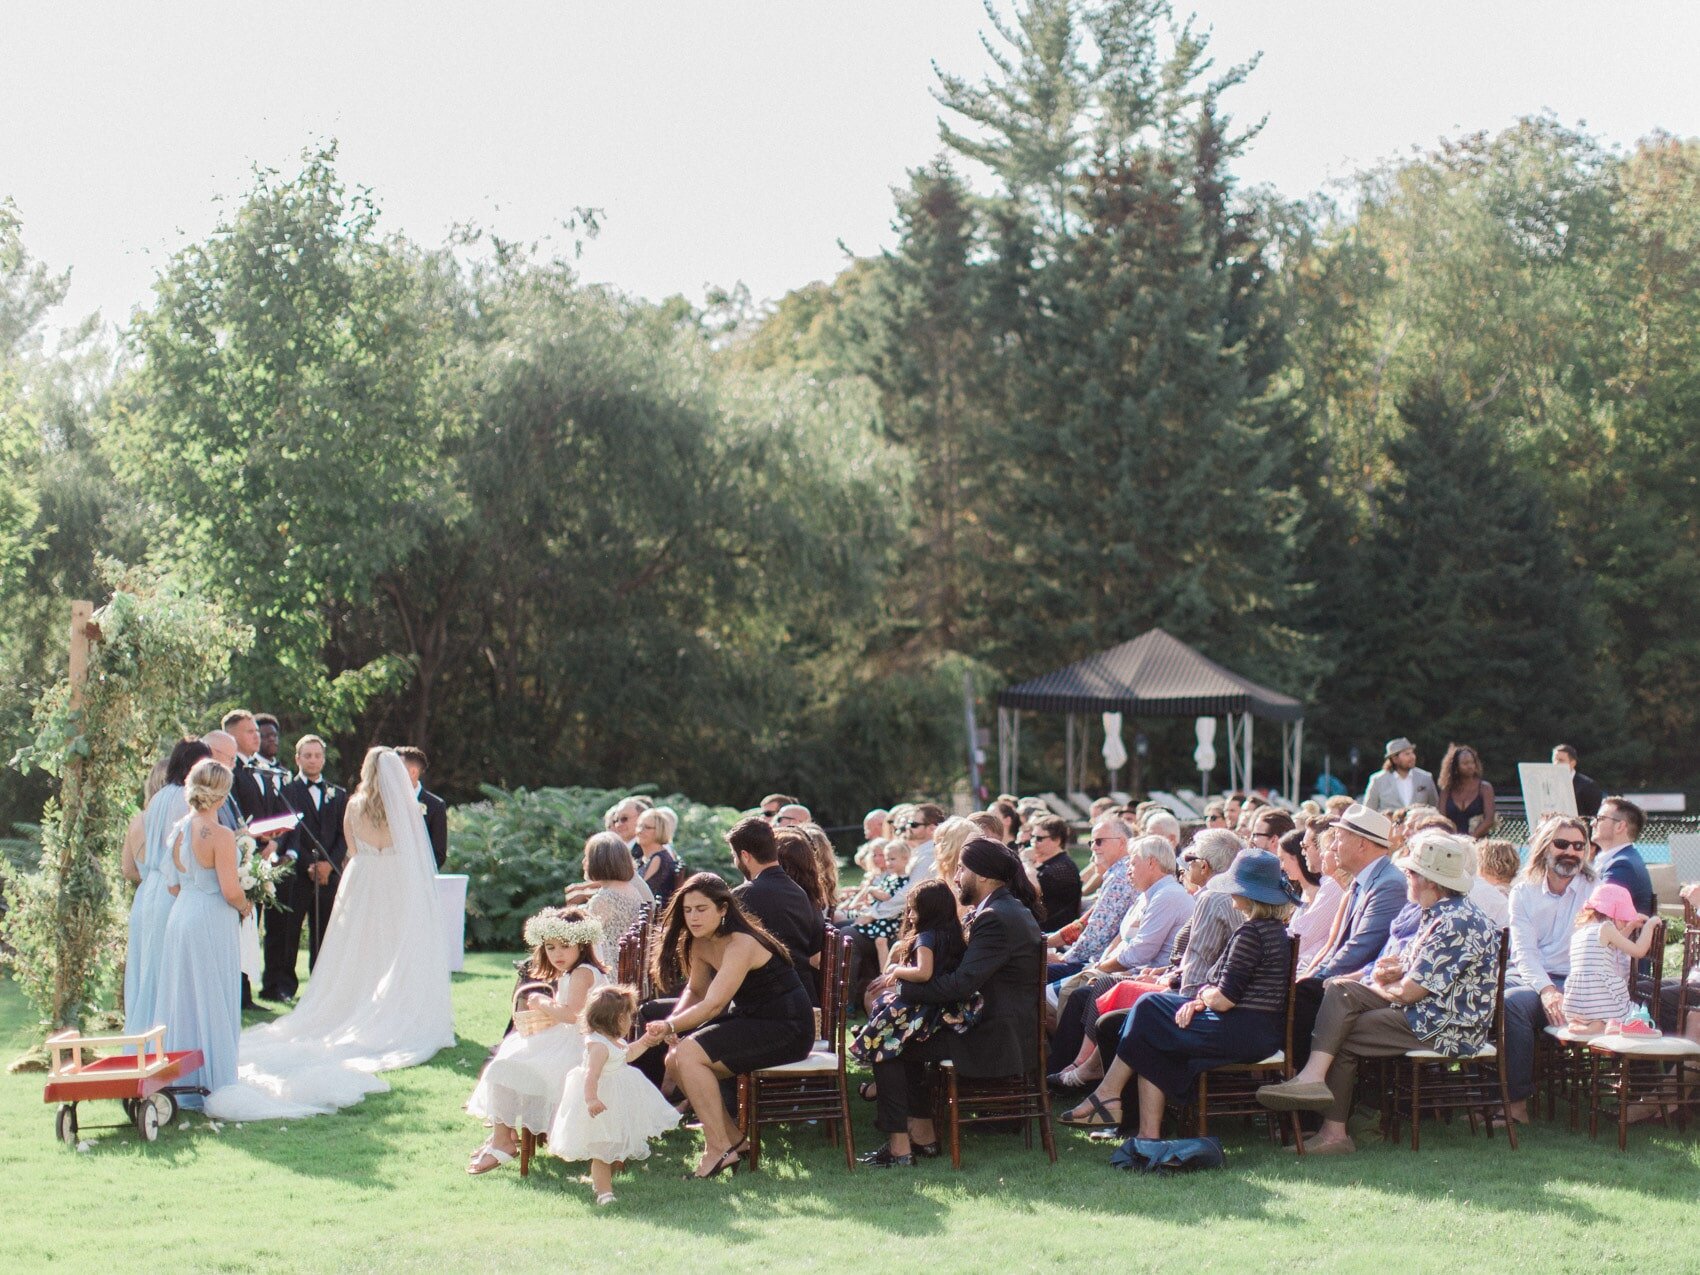 natural candid photo of the bride and groom at their outdoor wedding ceremony at windermere house muskoka